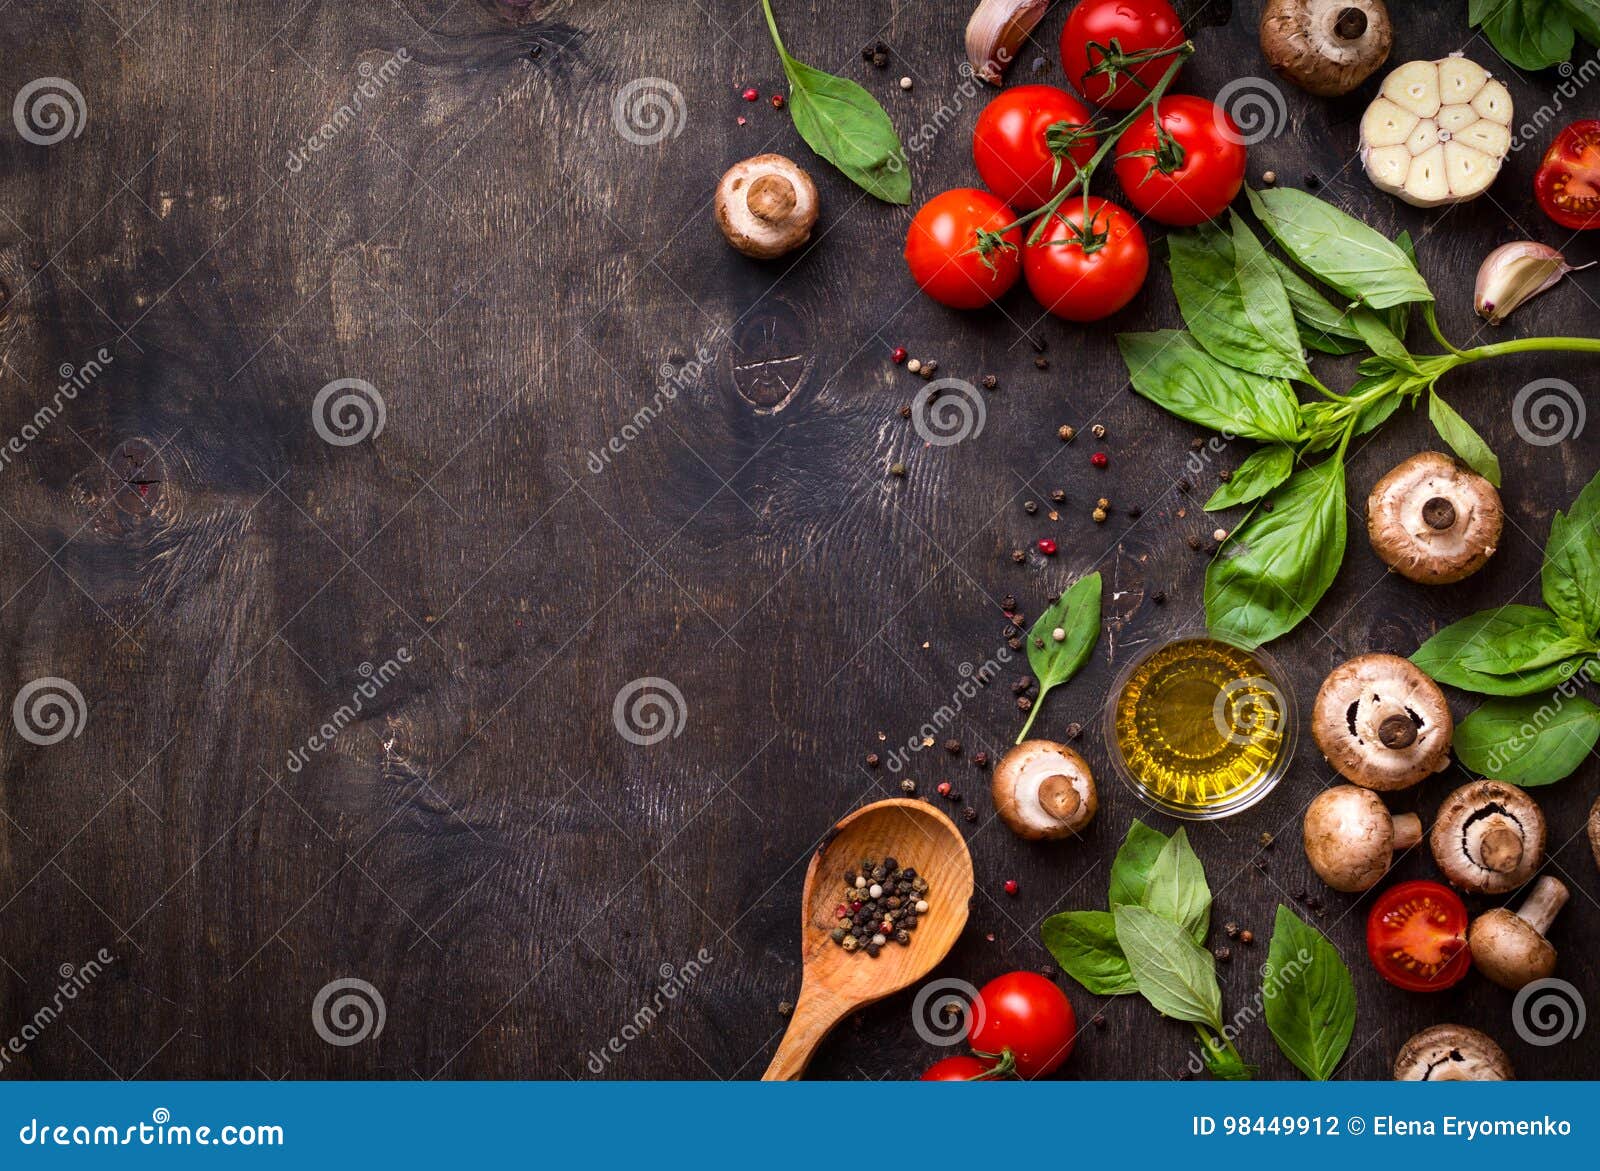 Raw Ingredients for Cooking Stock Photo - Image of olive, basil: 98449912